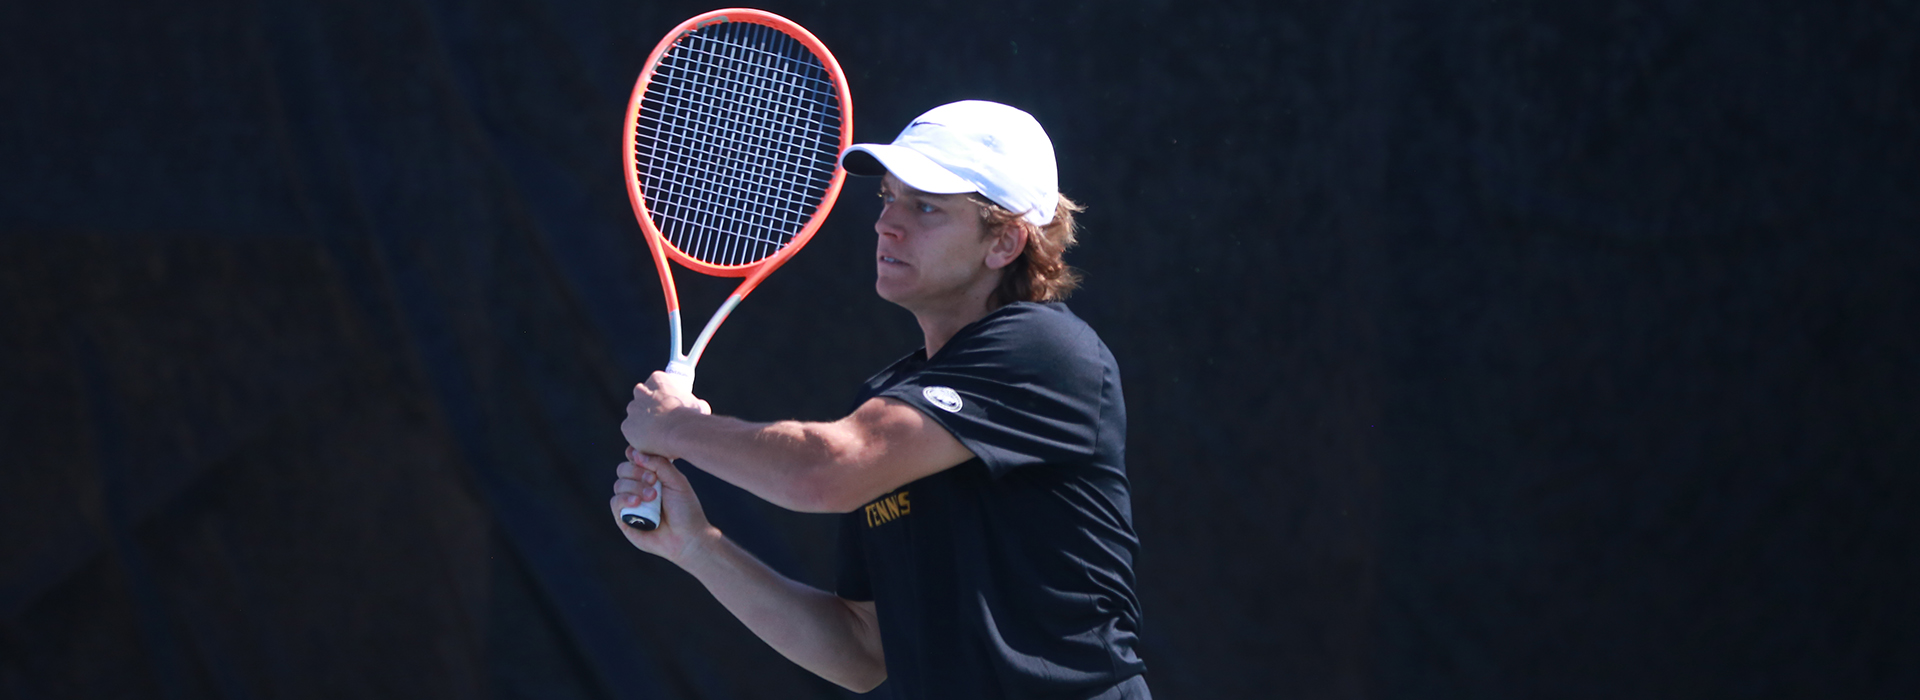 Golden Eagles upended by Belmont in Saturday affair